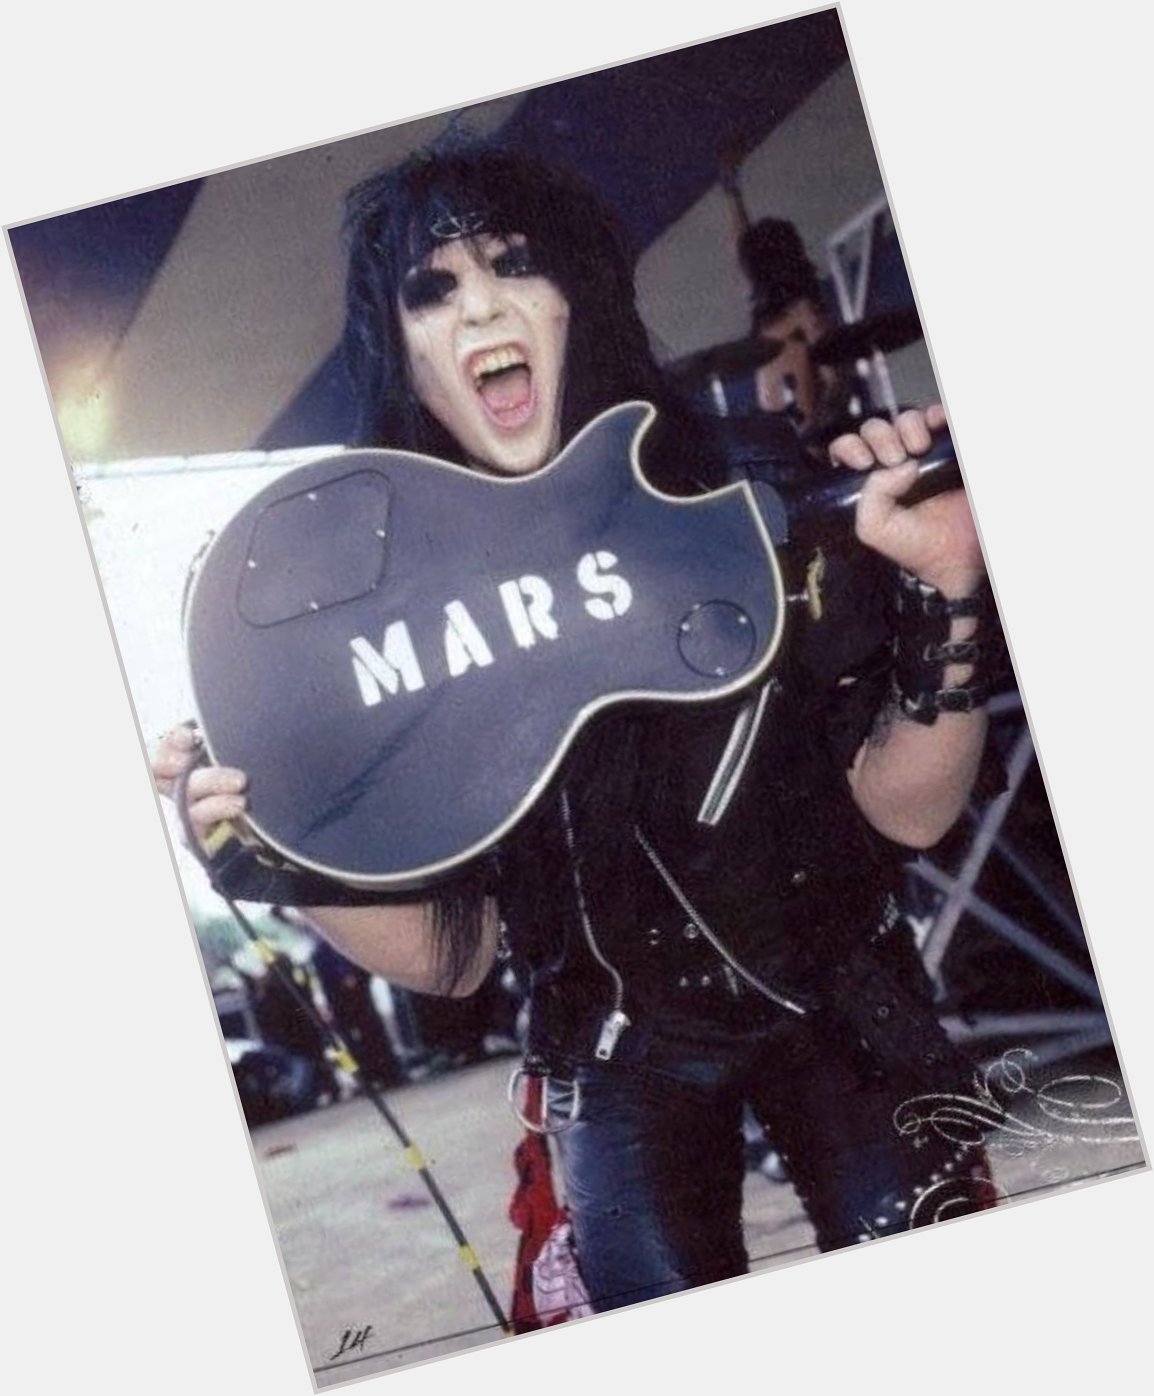 Happy Birthday to the one and only Mick Mars. I hope today is awesome as your shredding skills!      